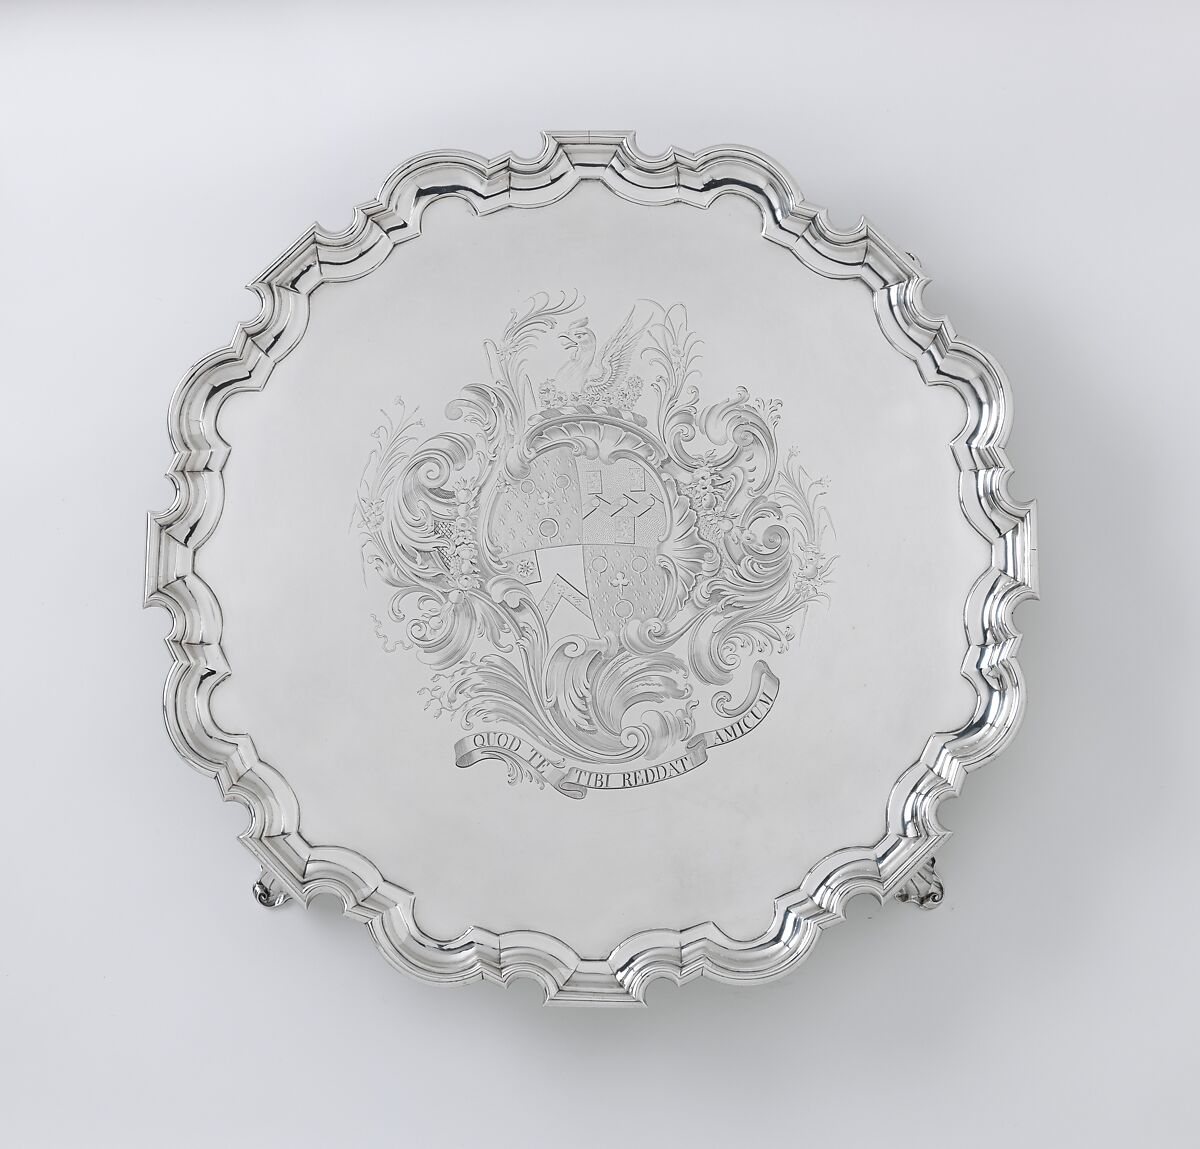 Salver with arms of Judith Jodrell, Possibly by John Swift (British, active from 1728), Silver, British, London 